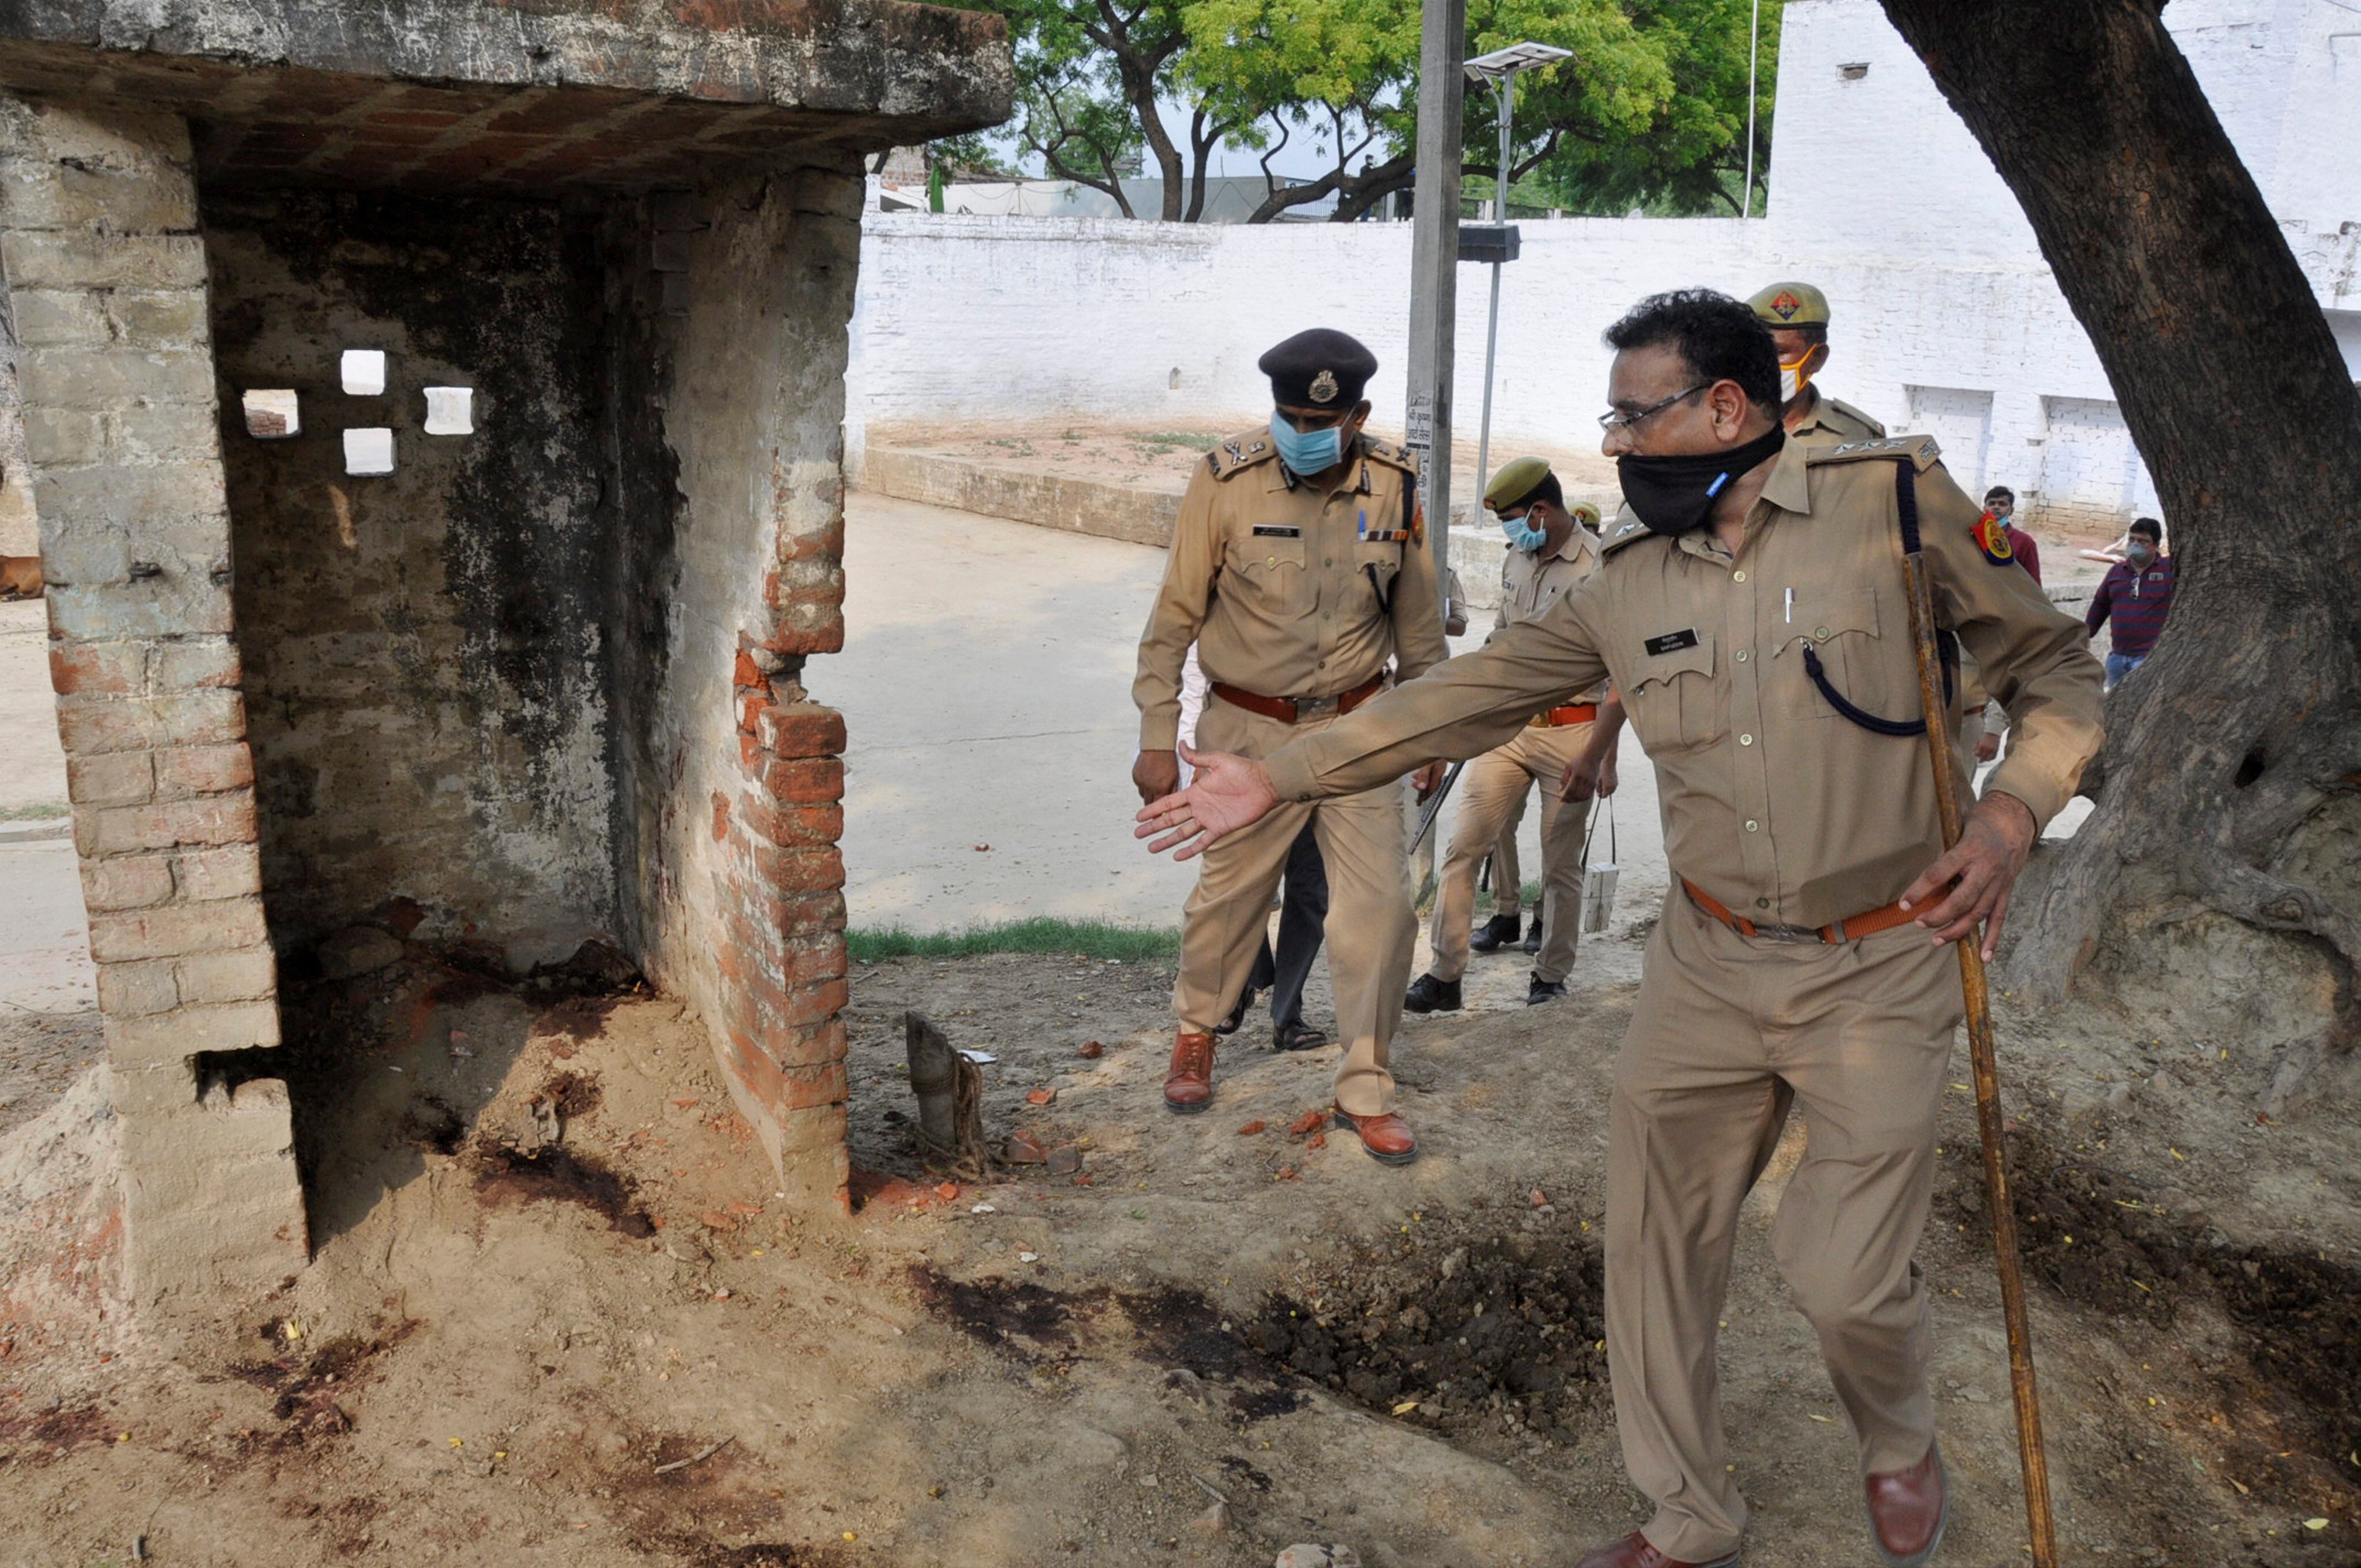 ADG Law and Order Prashant Kumar being shown a site during a visit to the Bikhru village after an encounter between the police and history sheeter Vikas Dubey and other criminals, under Chaubey Pur Police Station in Kanpur, Friday, July 3, 2020. At least 8 police personnel including a Deputy Superintendent of Police were killed in the encounter. (PTI Photo)